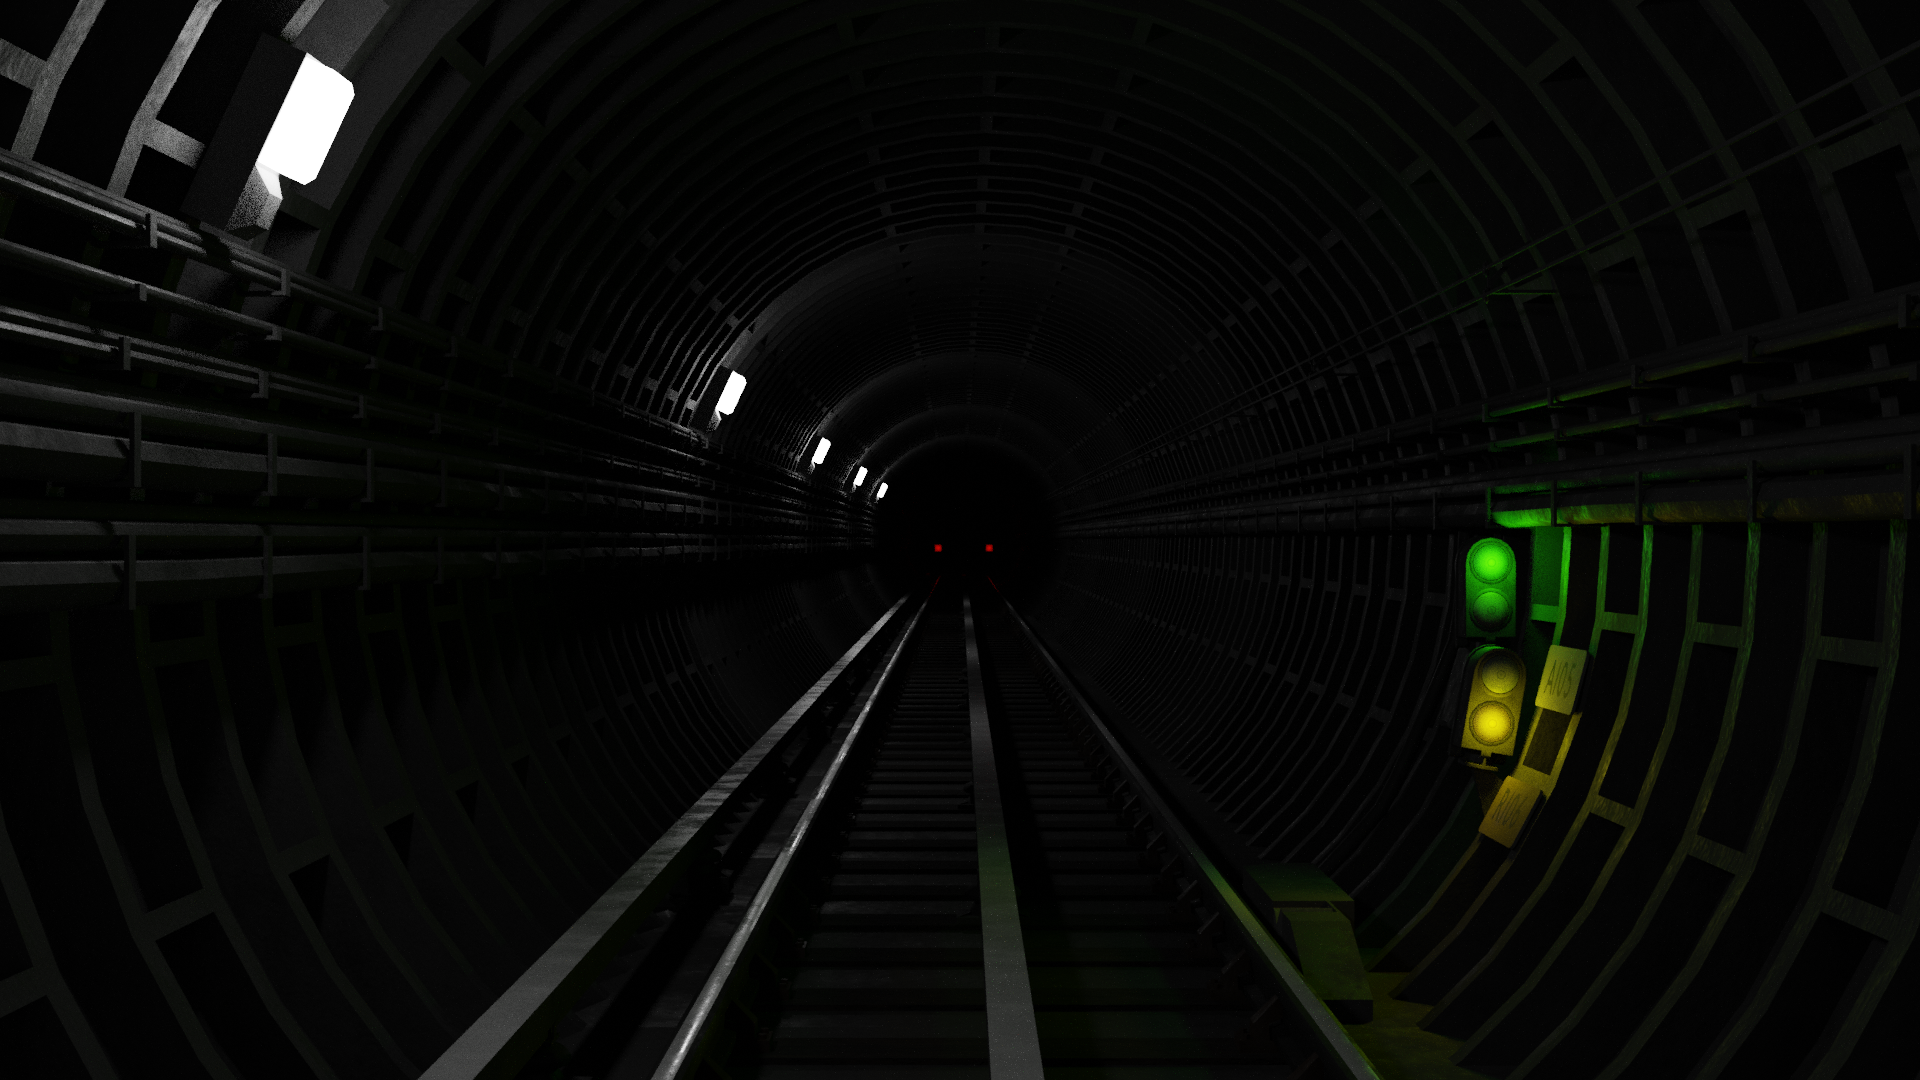 Apcell Tunnel Render Signal 2020